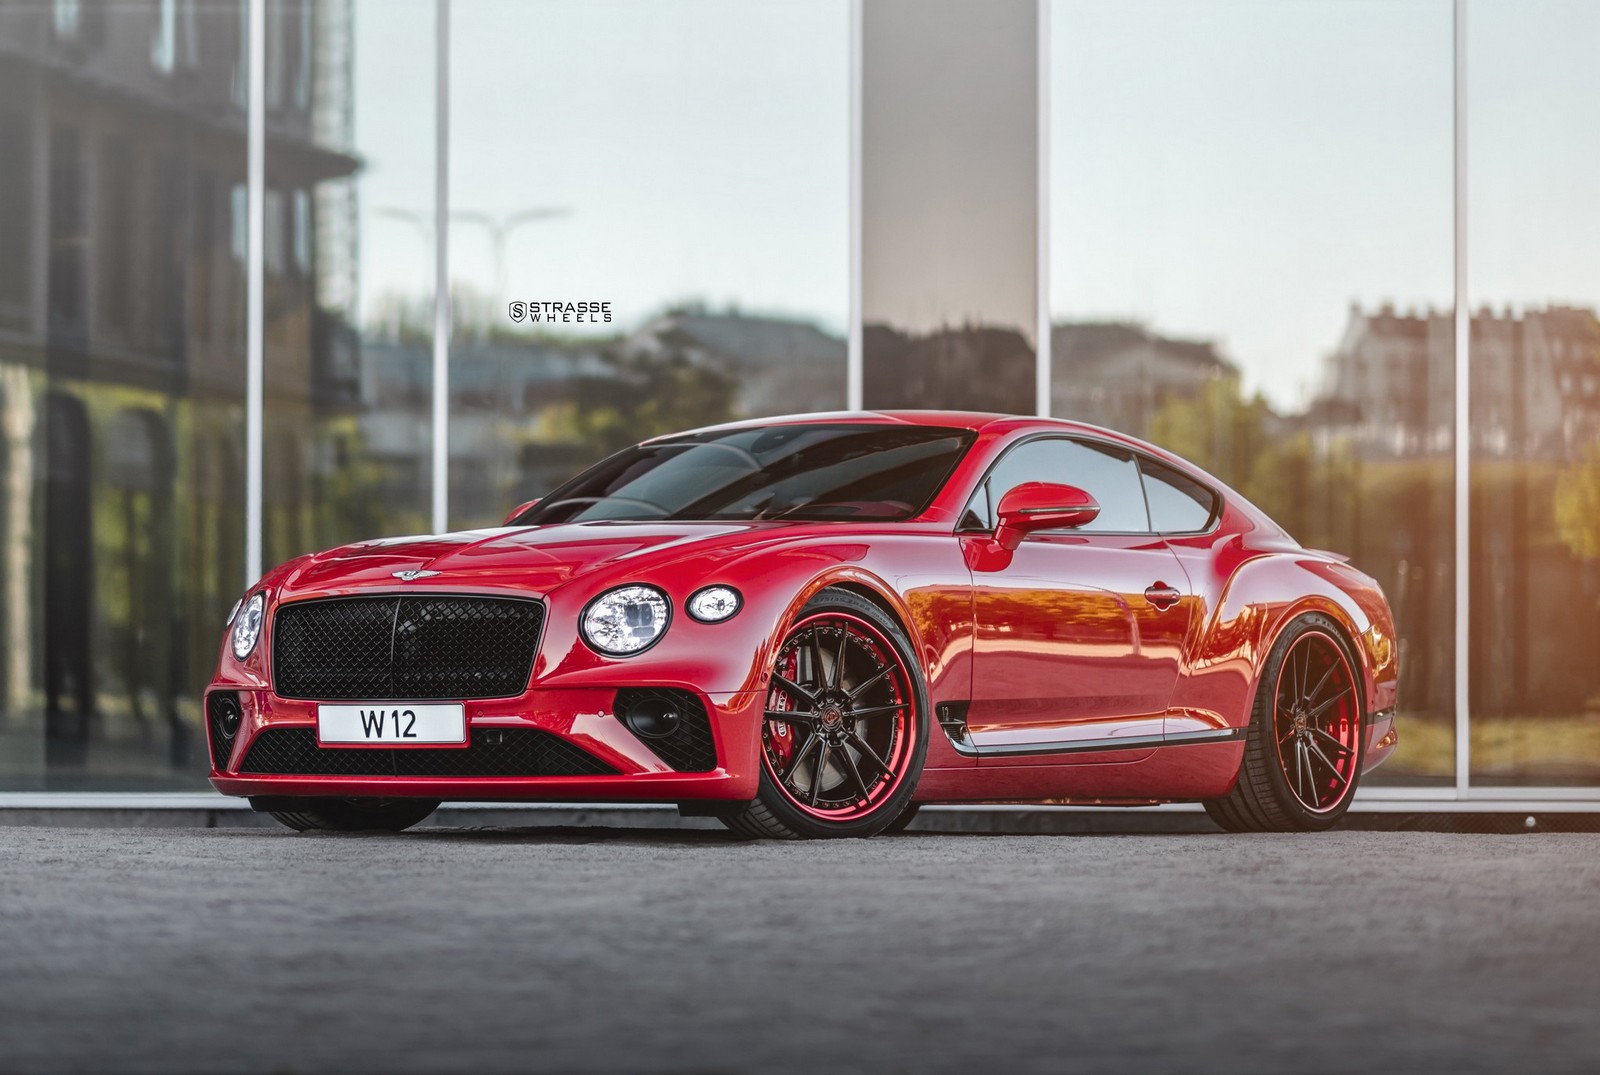 How Much Red Is Too Much? Meet Strasse’s Custom Bentley Continental GT